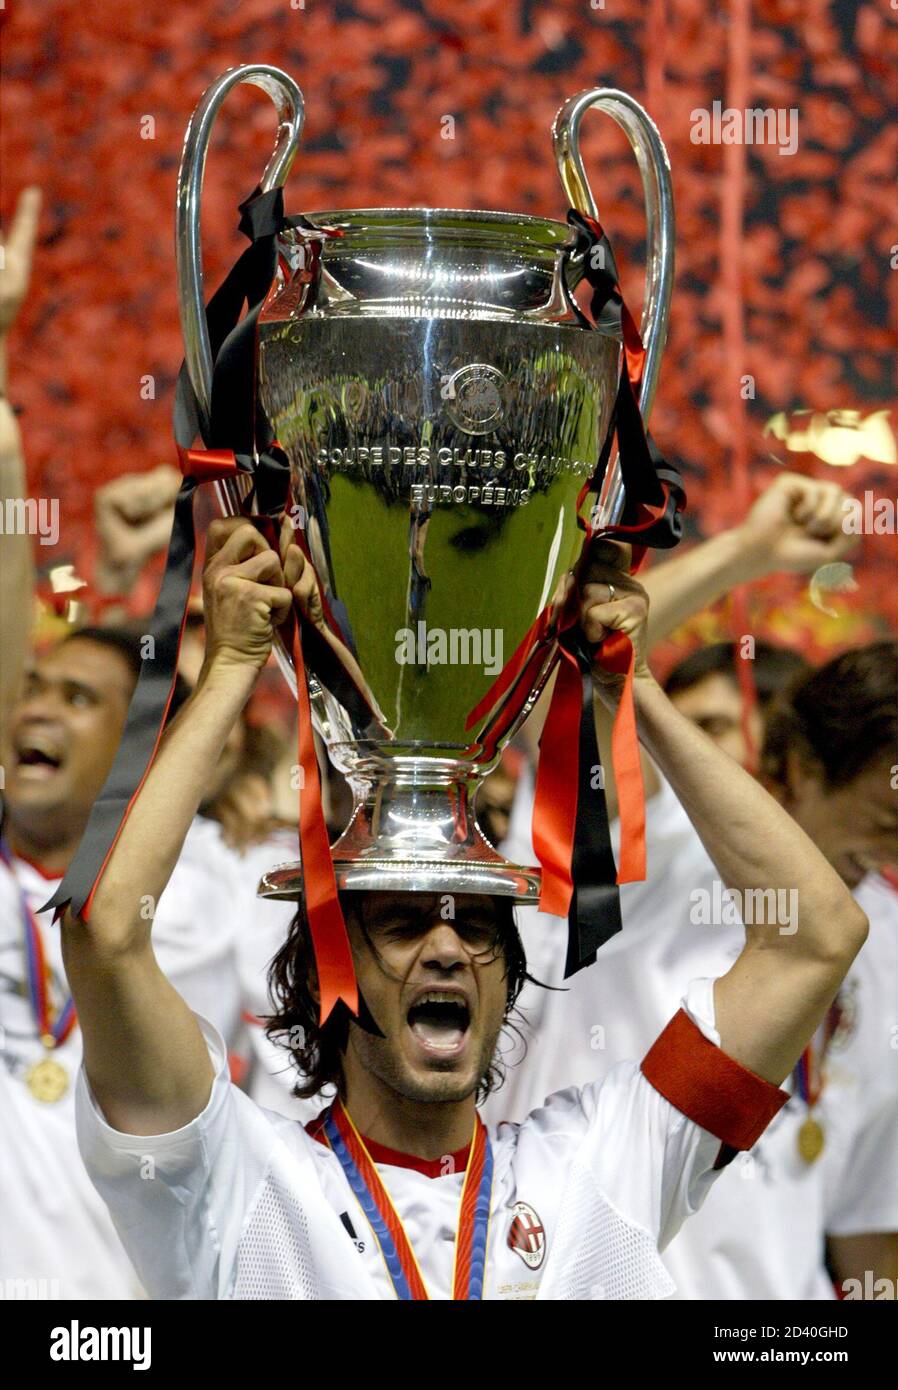 Country of Citizenship Cereal crack AC MILAN CAPTAIN AND MAN OF THE MATCH PAOLO MALDINI RAISES CHAMPIONS LEAGUE  TROPHY AFTER VICTORY OVER JUVENTUS IN THE FINAL. AC Milan's captain and man  of the match Paolo Maldini raises